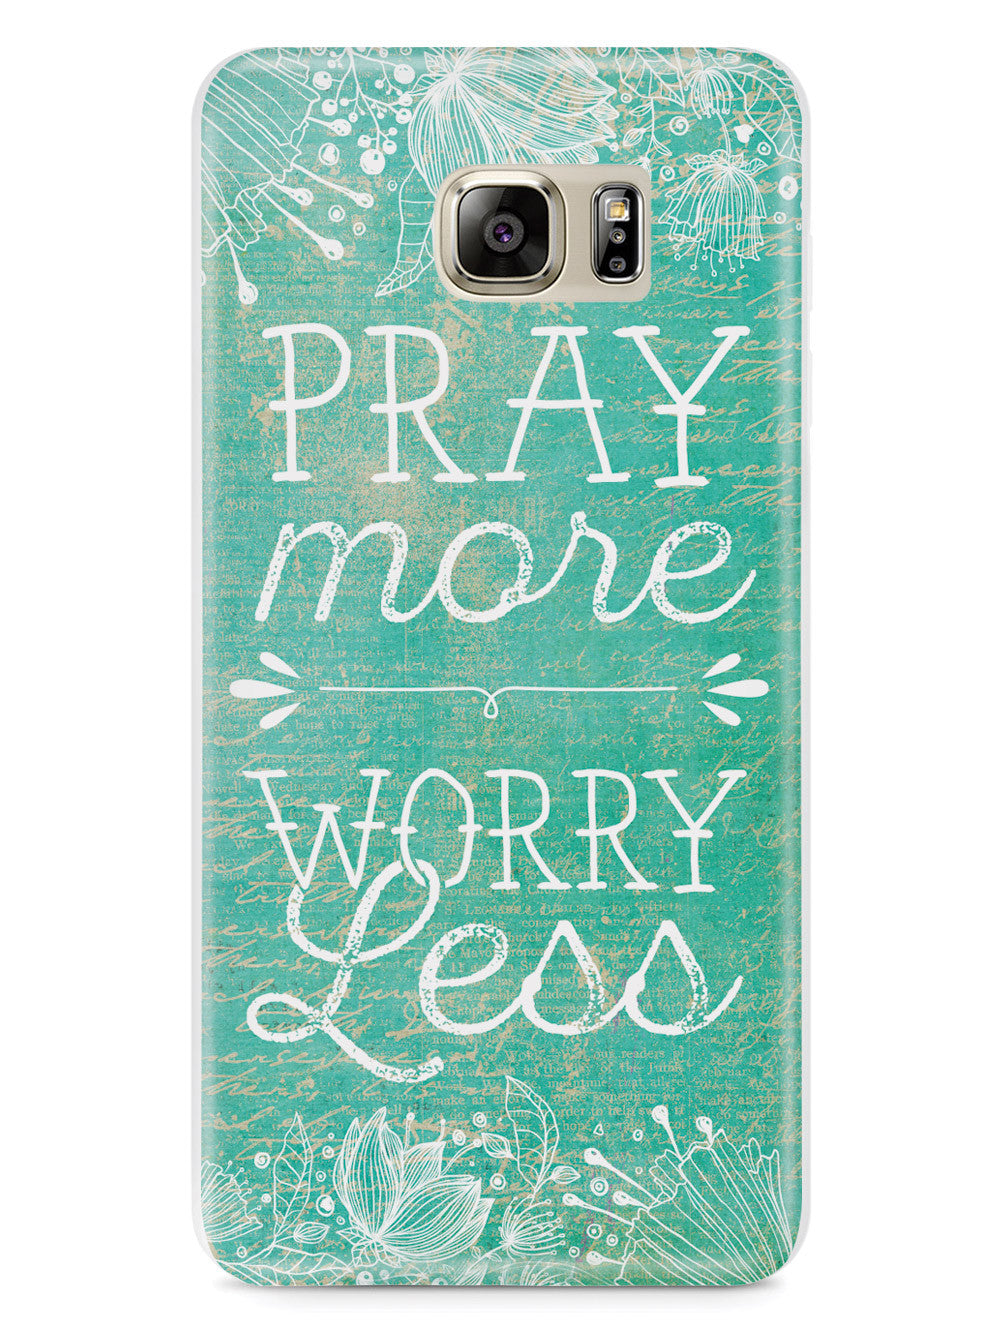 Pray More, Worry Less Case